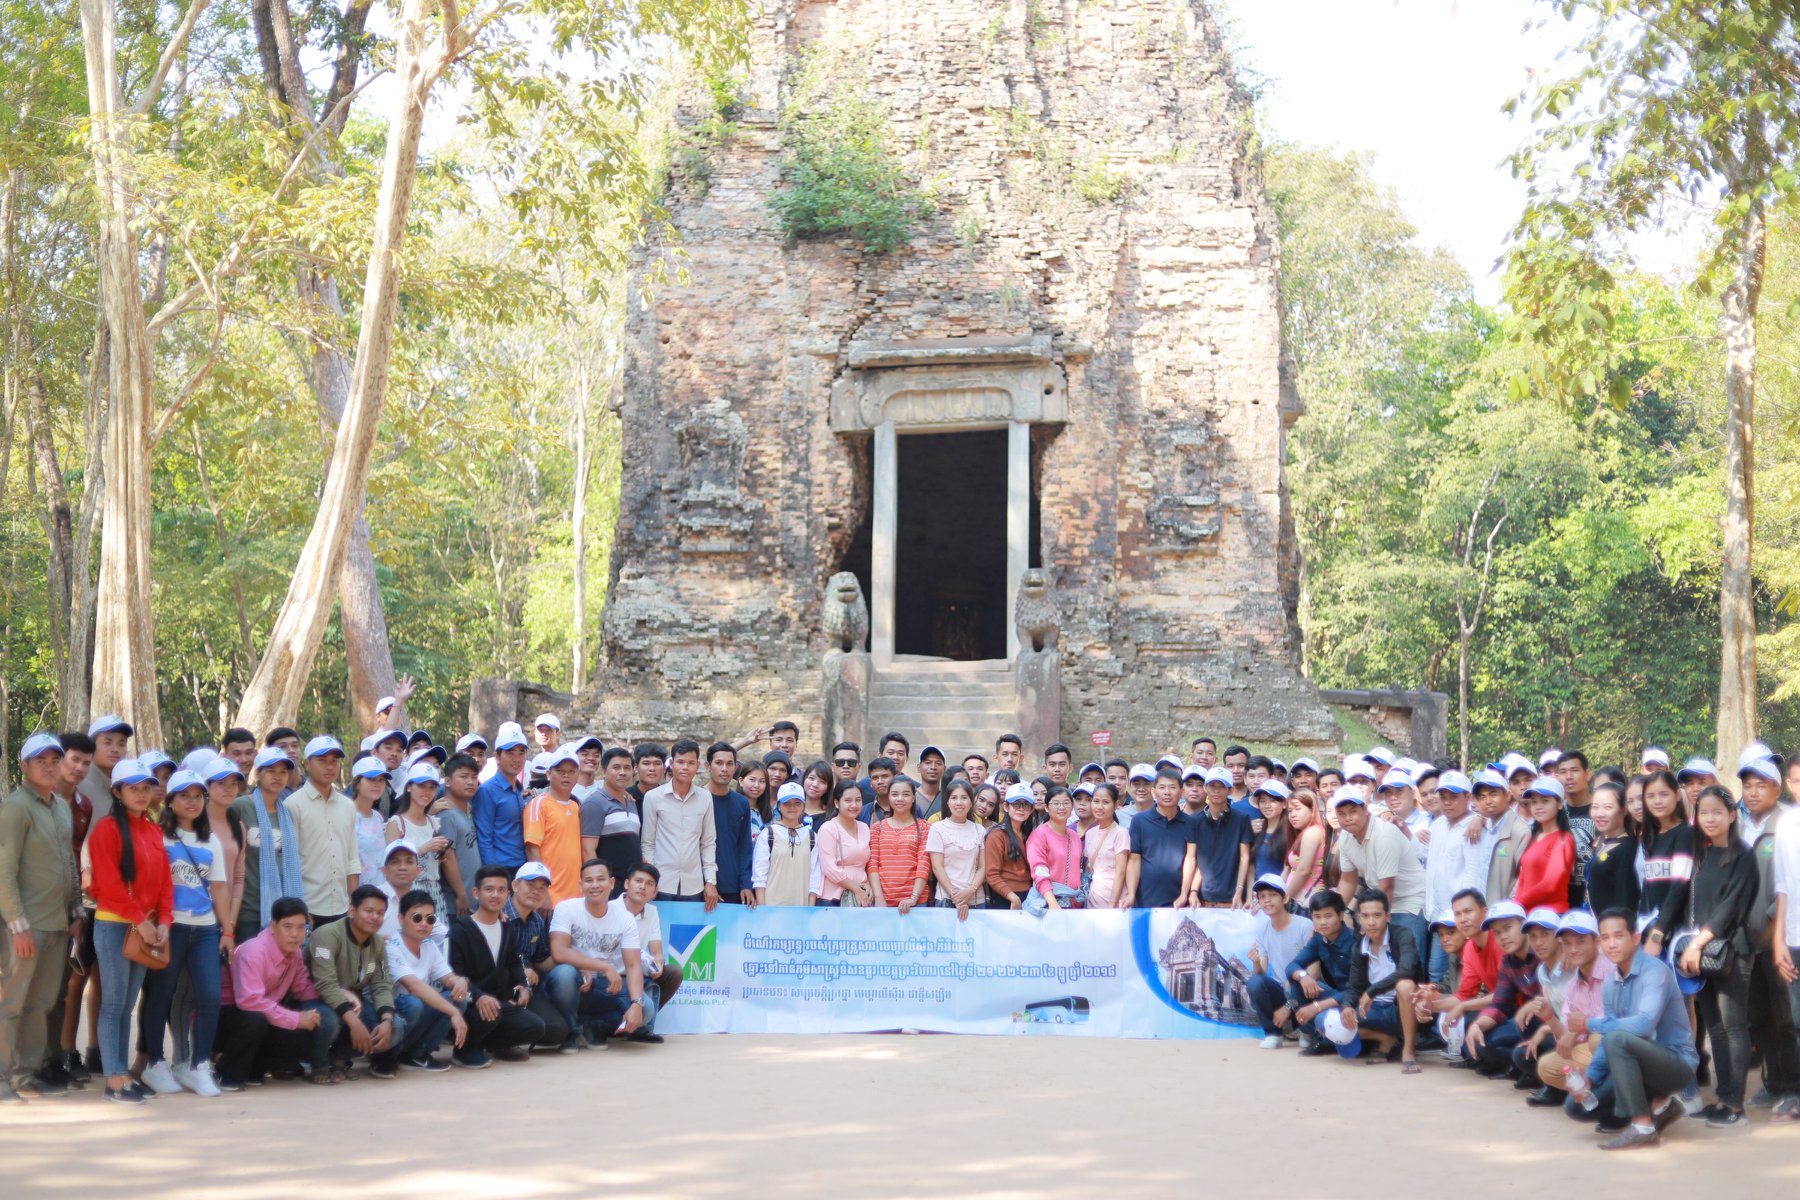 Annual Party of Mega Leasing Plc., staff to Preah Vihear